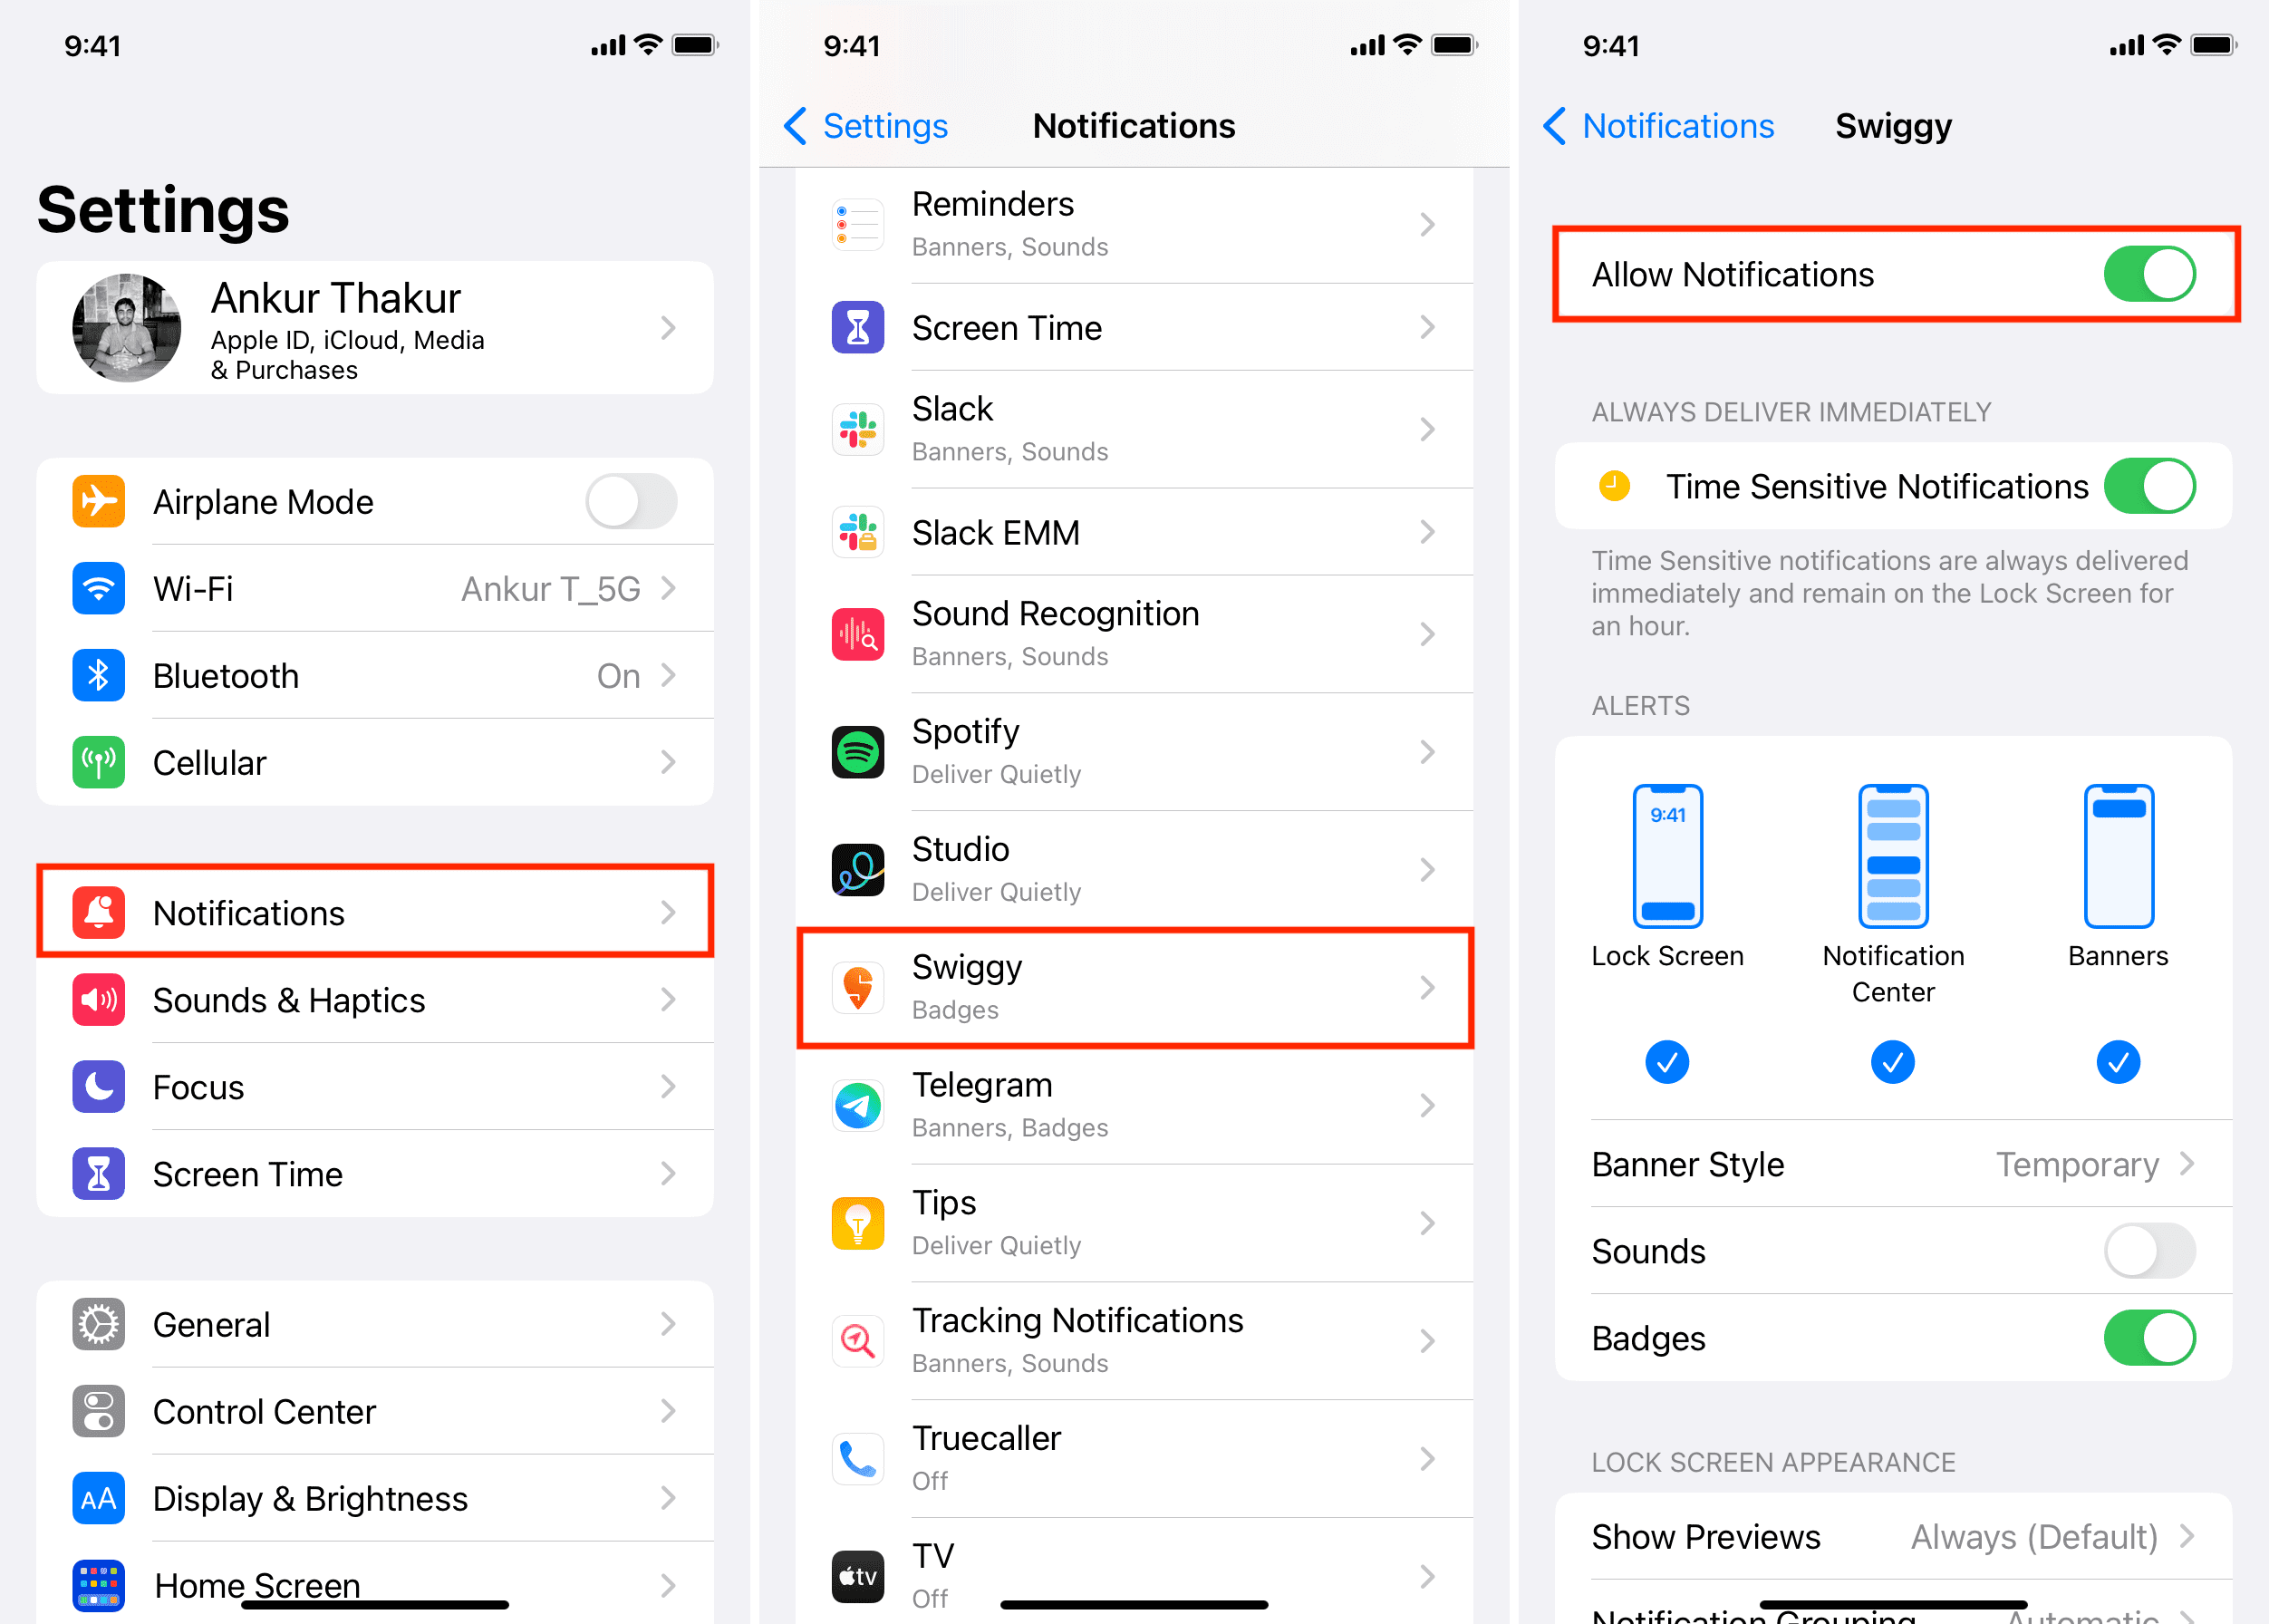 Turn on notifications from that app on iPhone